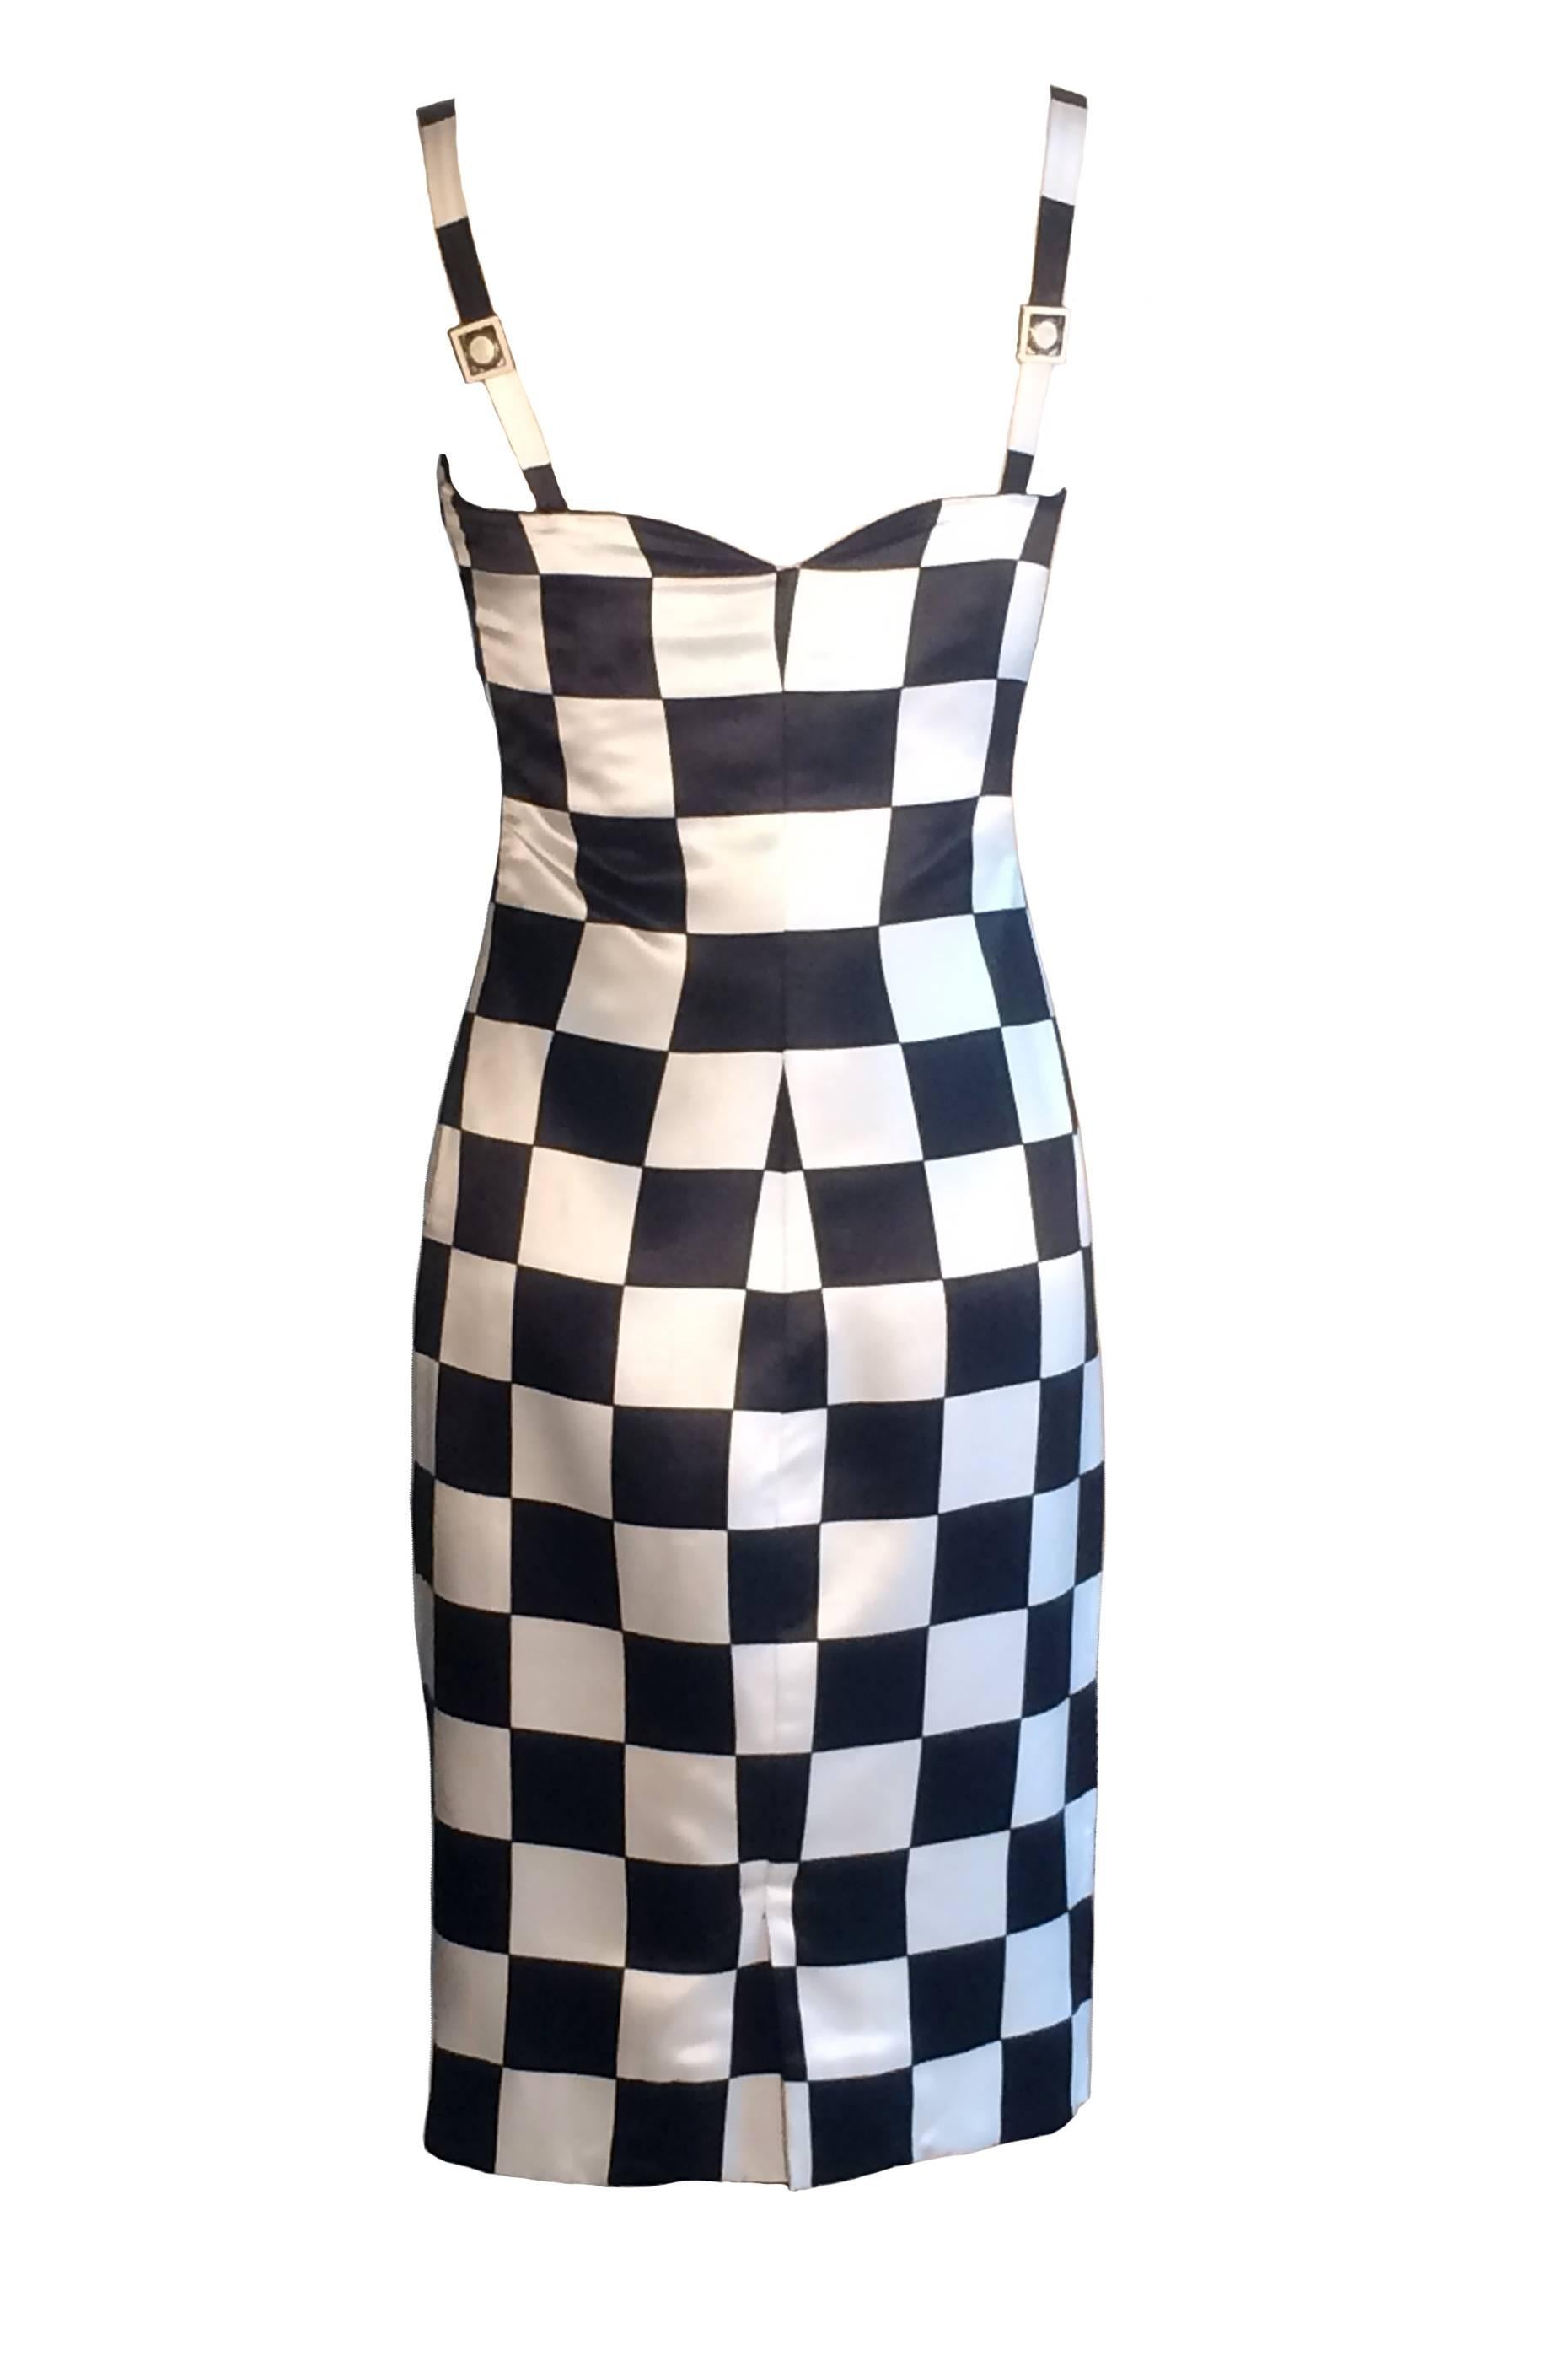 Gianni Versace Couture 1990s black and white checked wiggle dress. Side zip. 

63% viscose, 37% silk. 
Fully lined in 54% silk, 46% rayon.

Made in Italy.

Size 4, fits like modern 0/2.
Bust 32